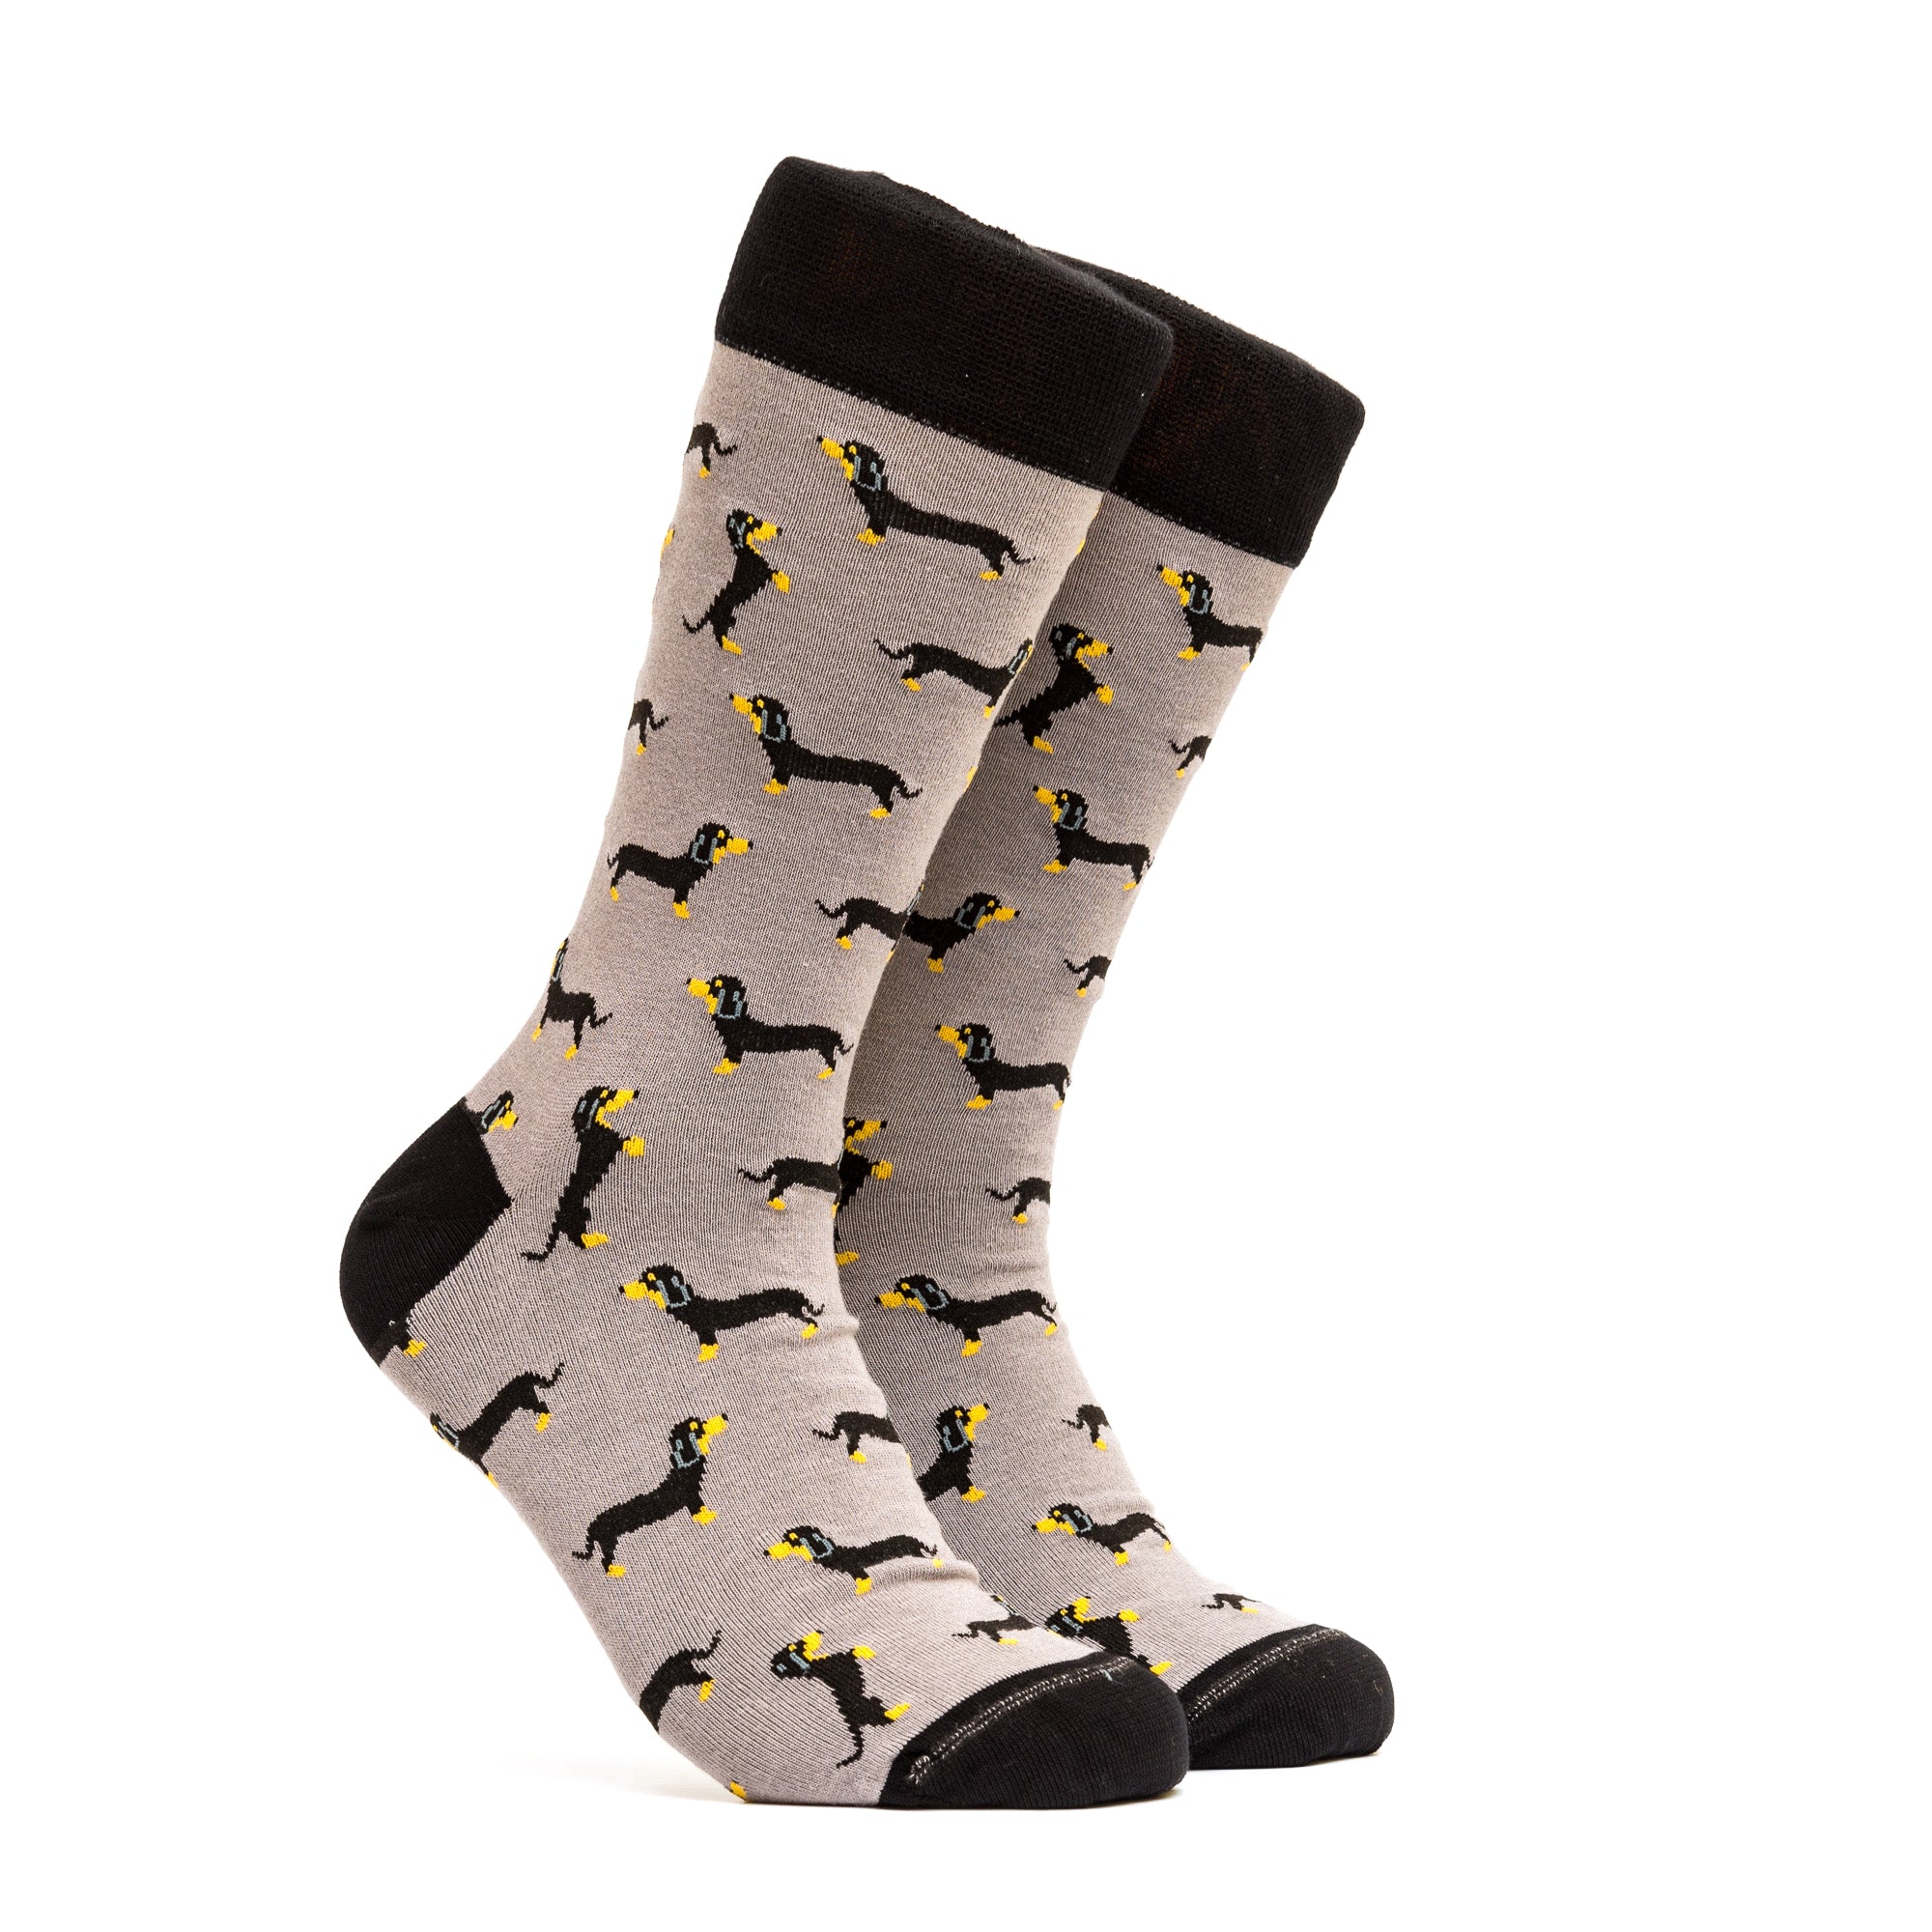 Happy Animals 2 Combo - Colors Yellow, Grey and Blue - 4 pairs